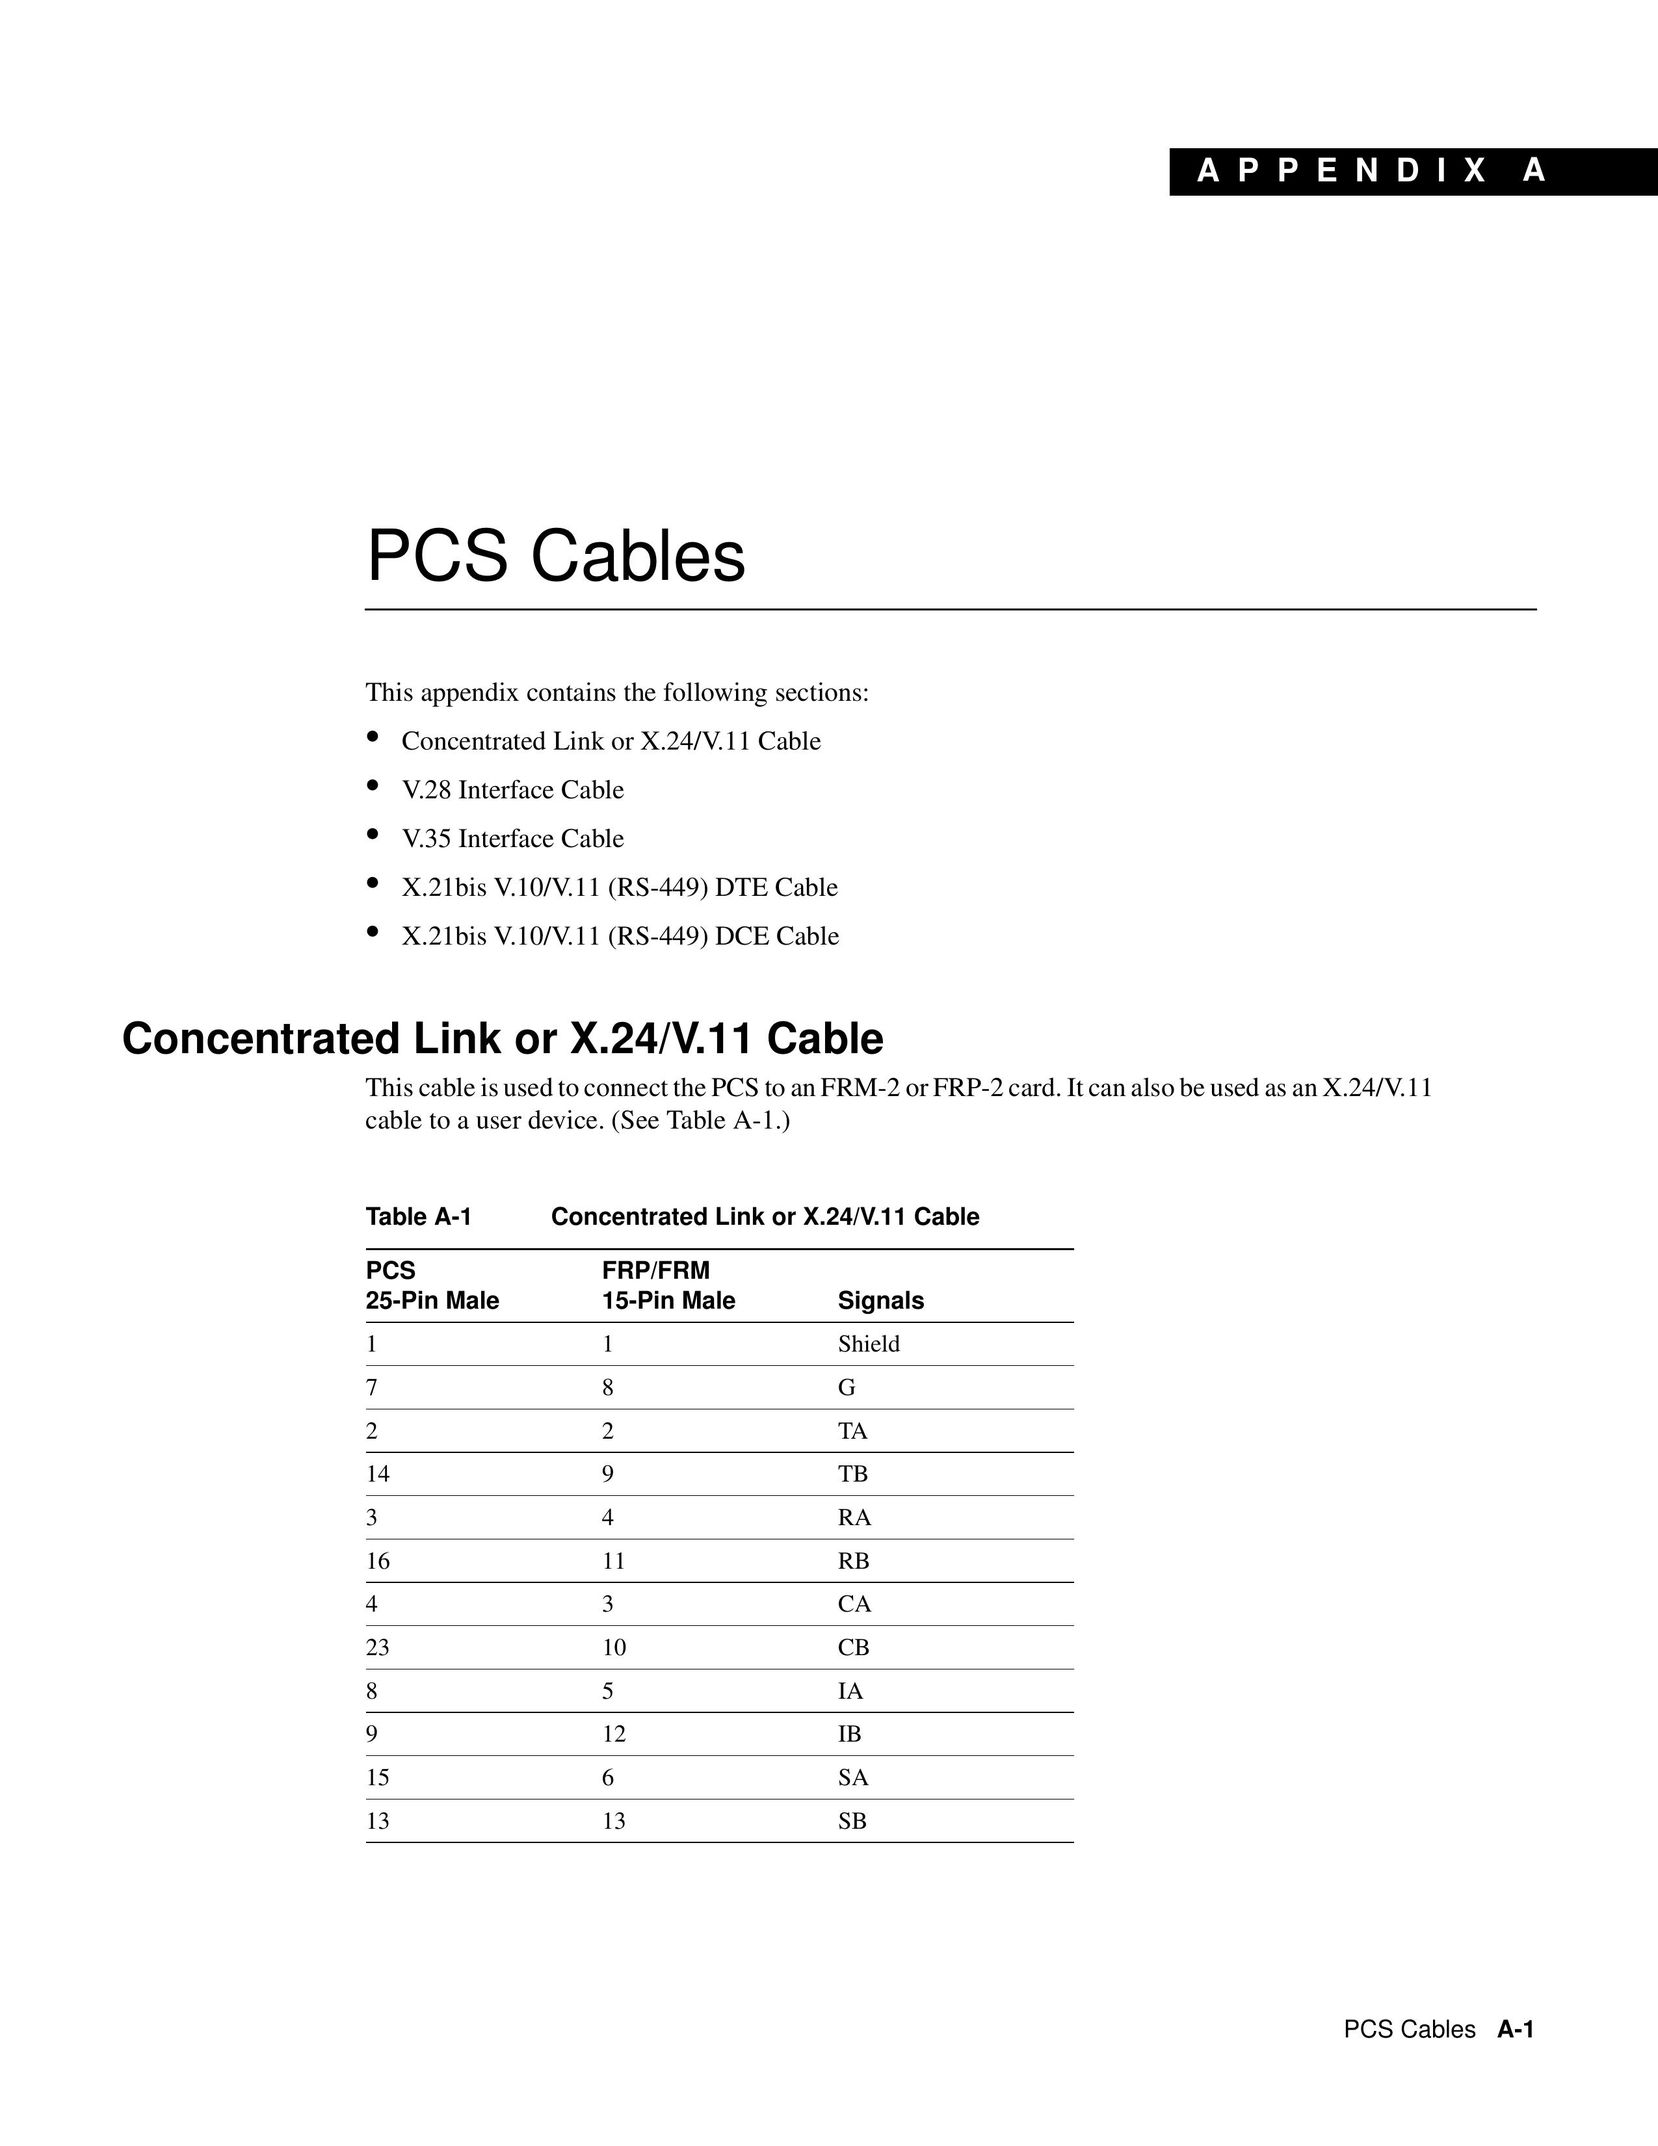 Cisco Systems PCS Cable Stereo System User Manual